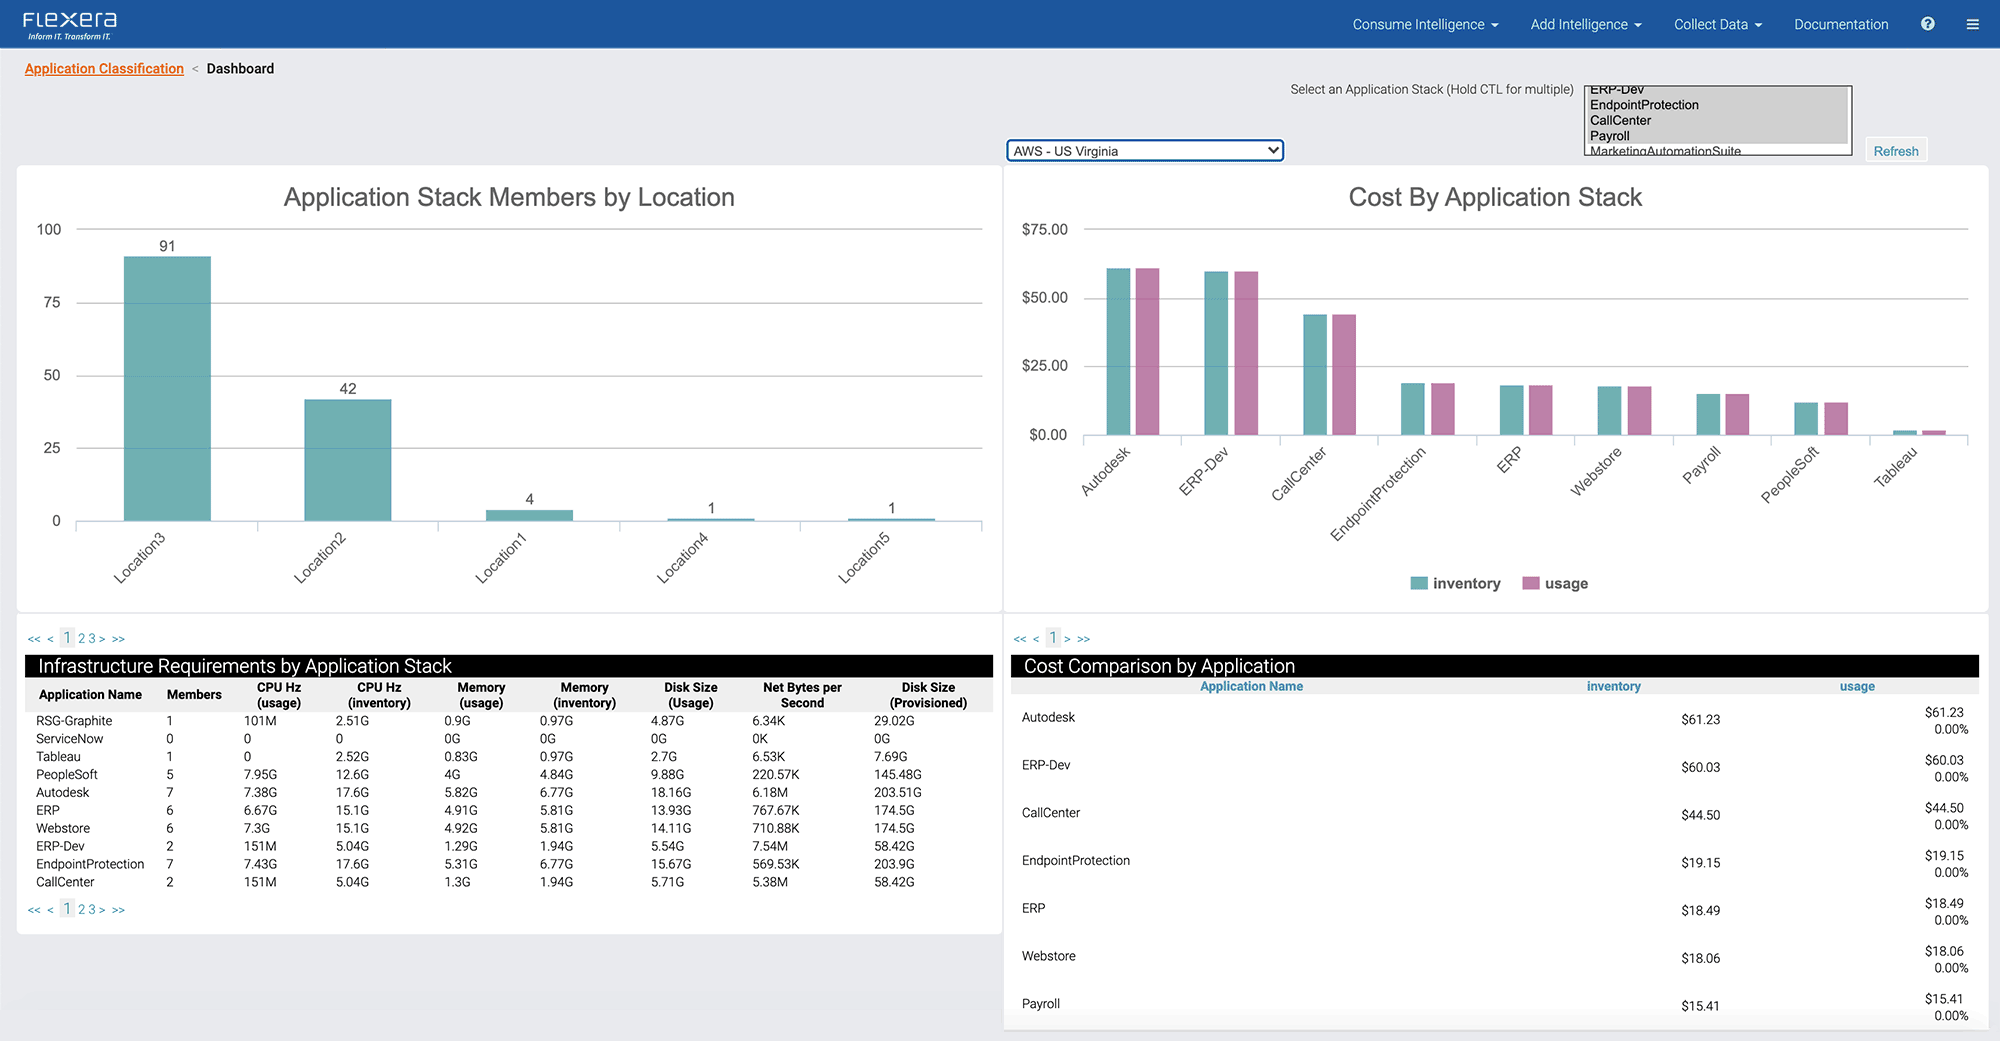 Application Classification Dashboard showing bar graphs for Application Stack Members by Location and Cost By Application Stack